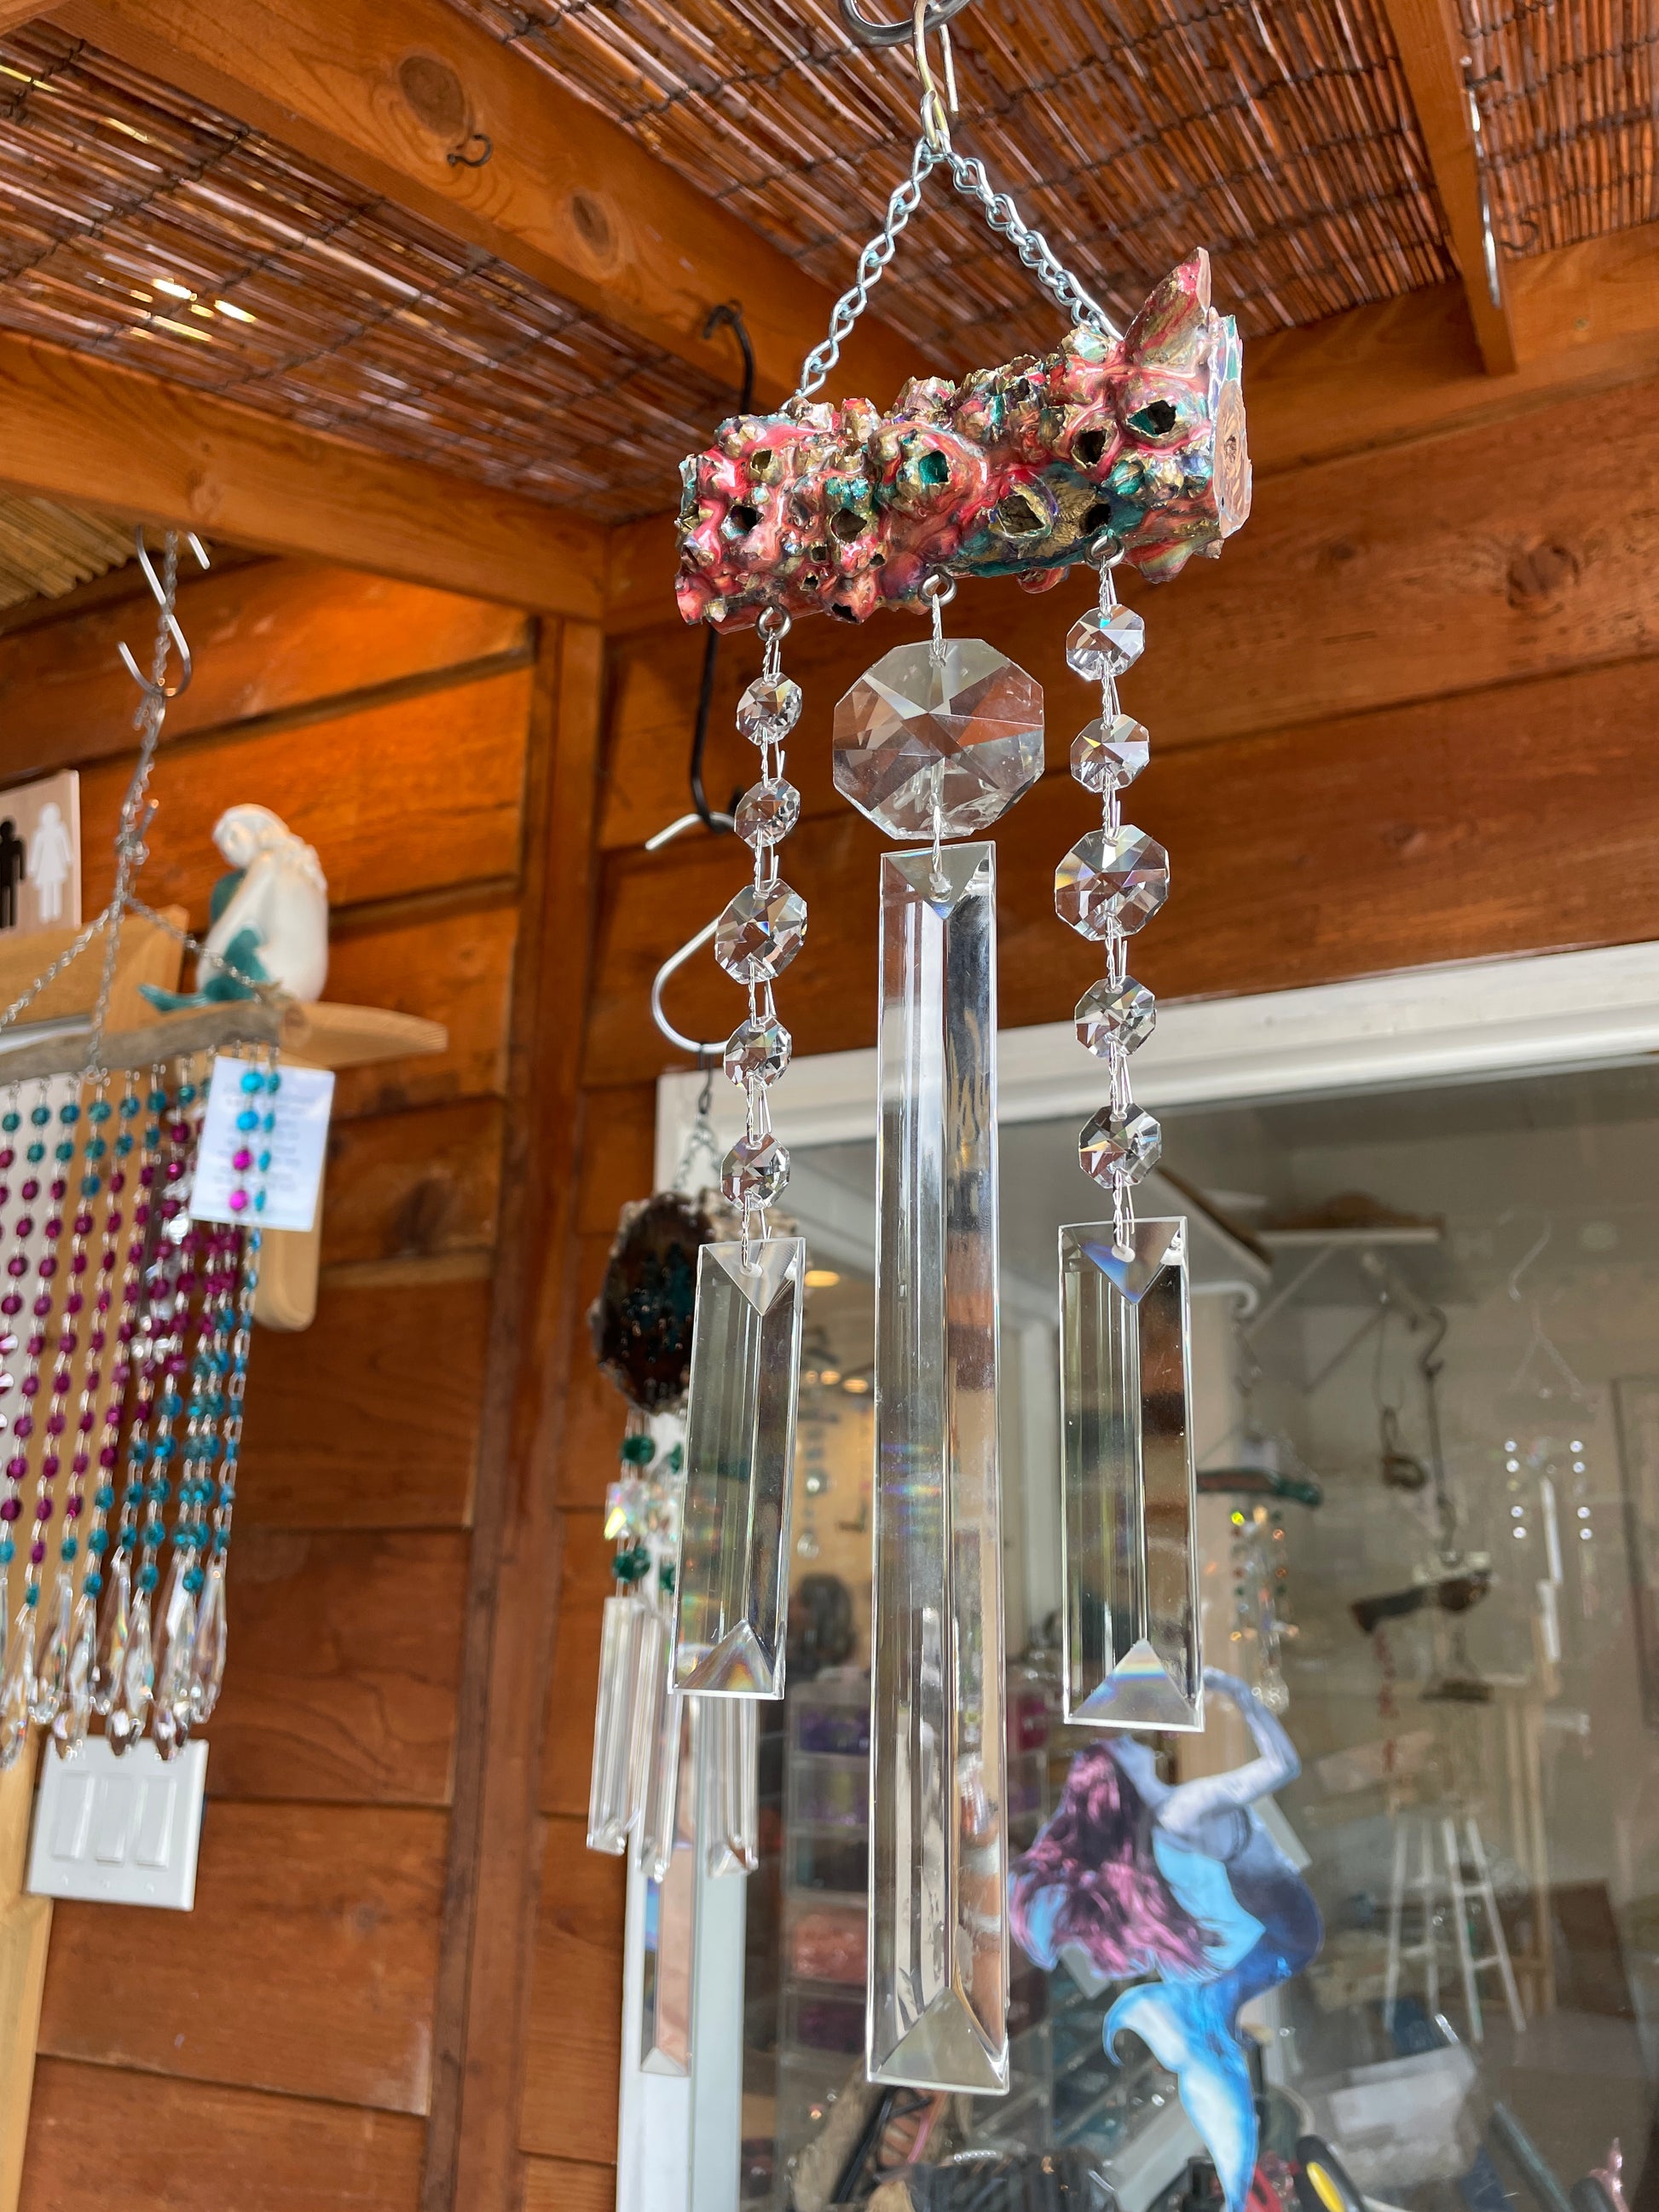 Barnacle wind chime 3 with chandiler crystals